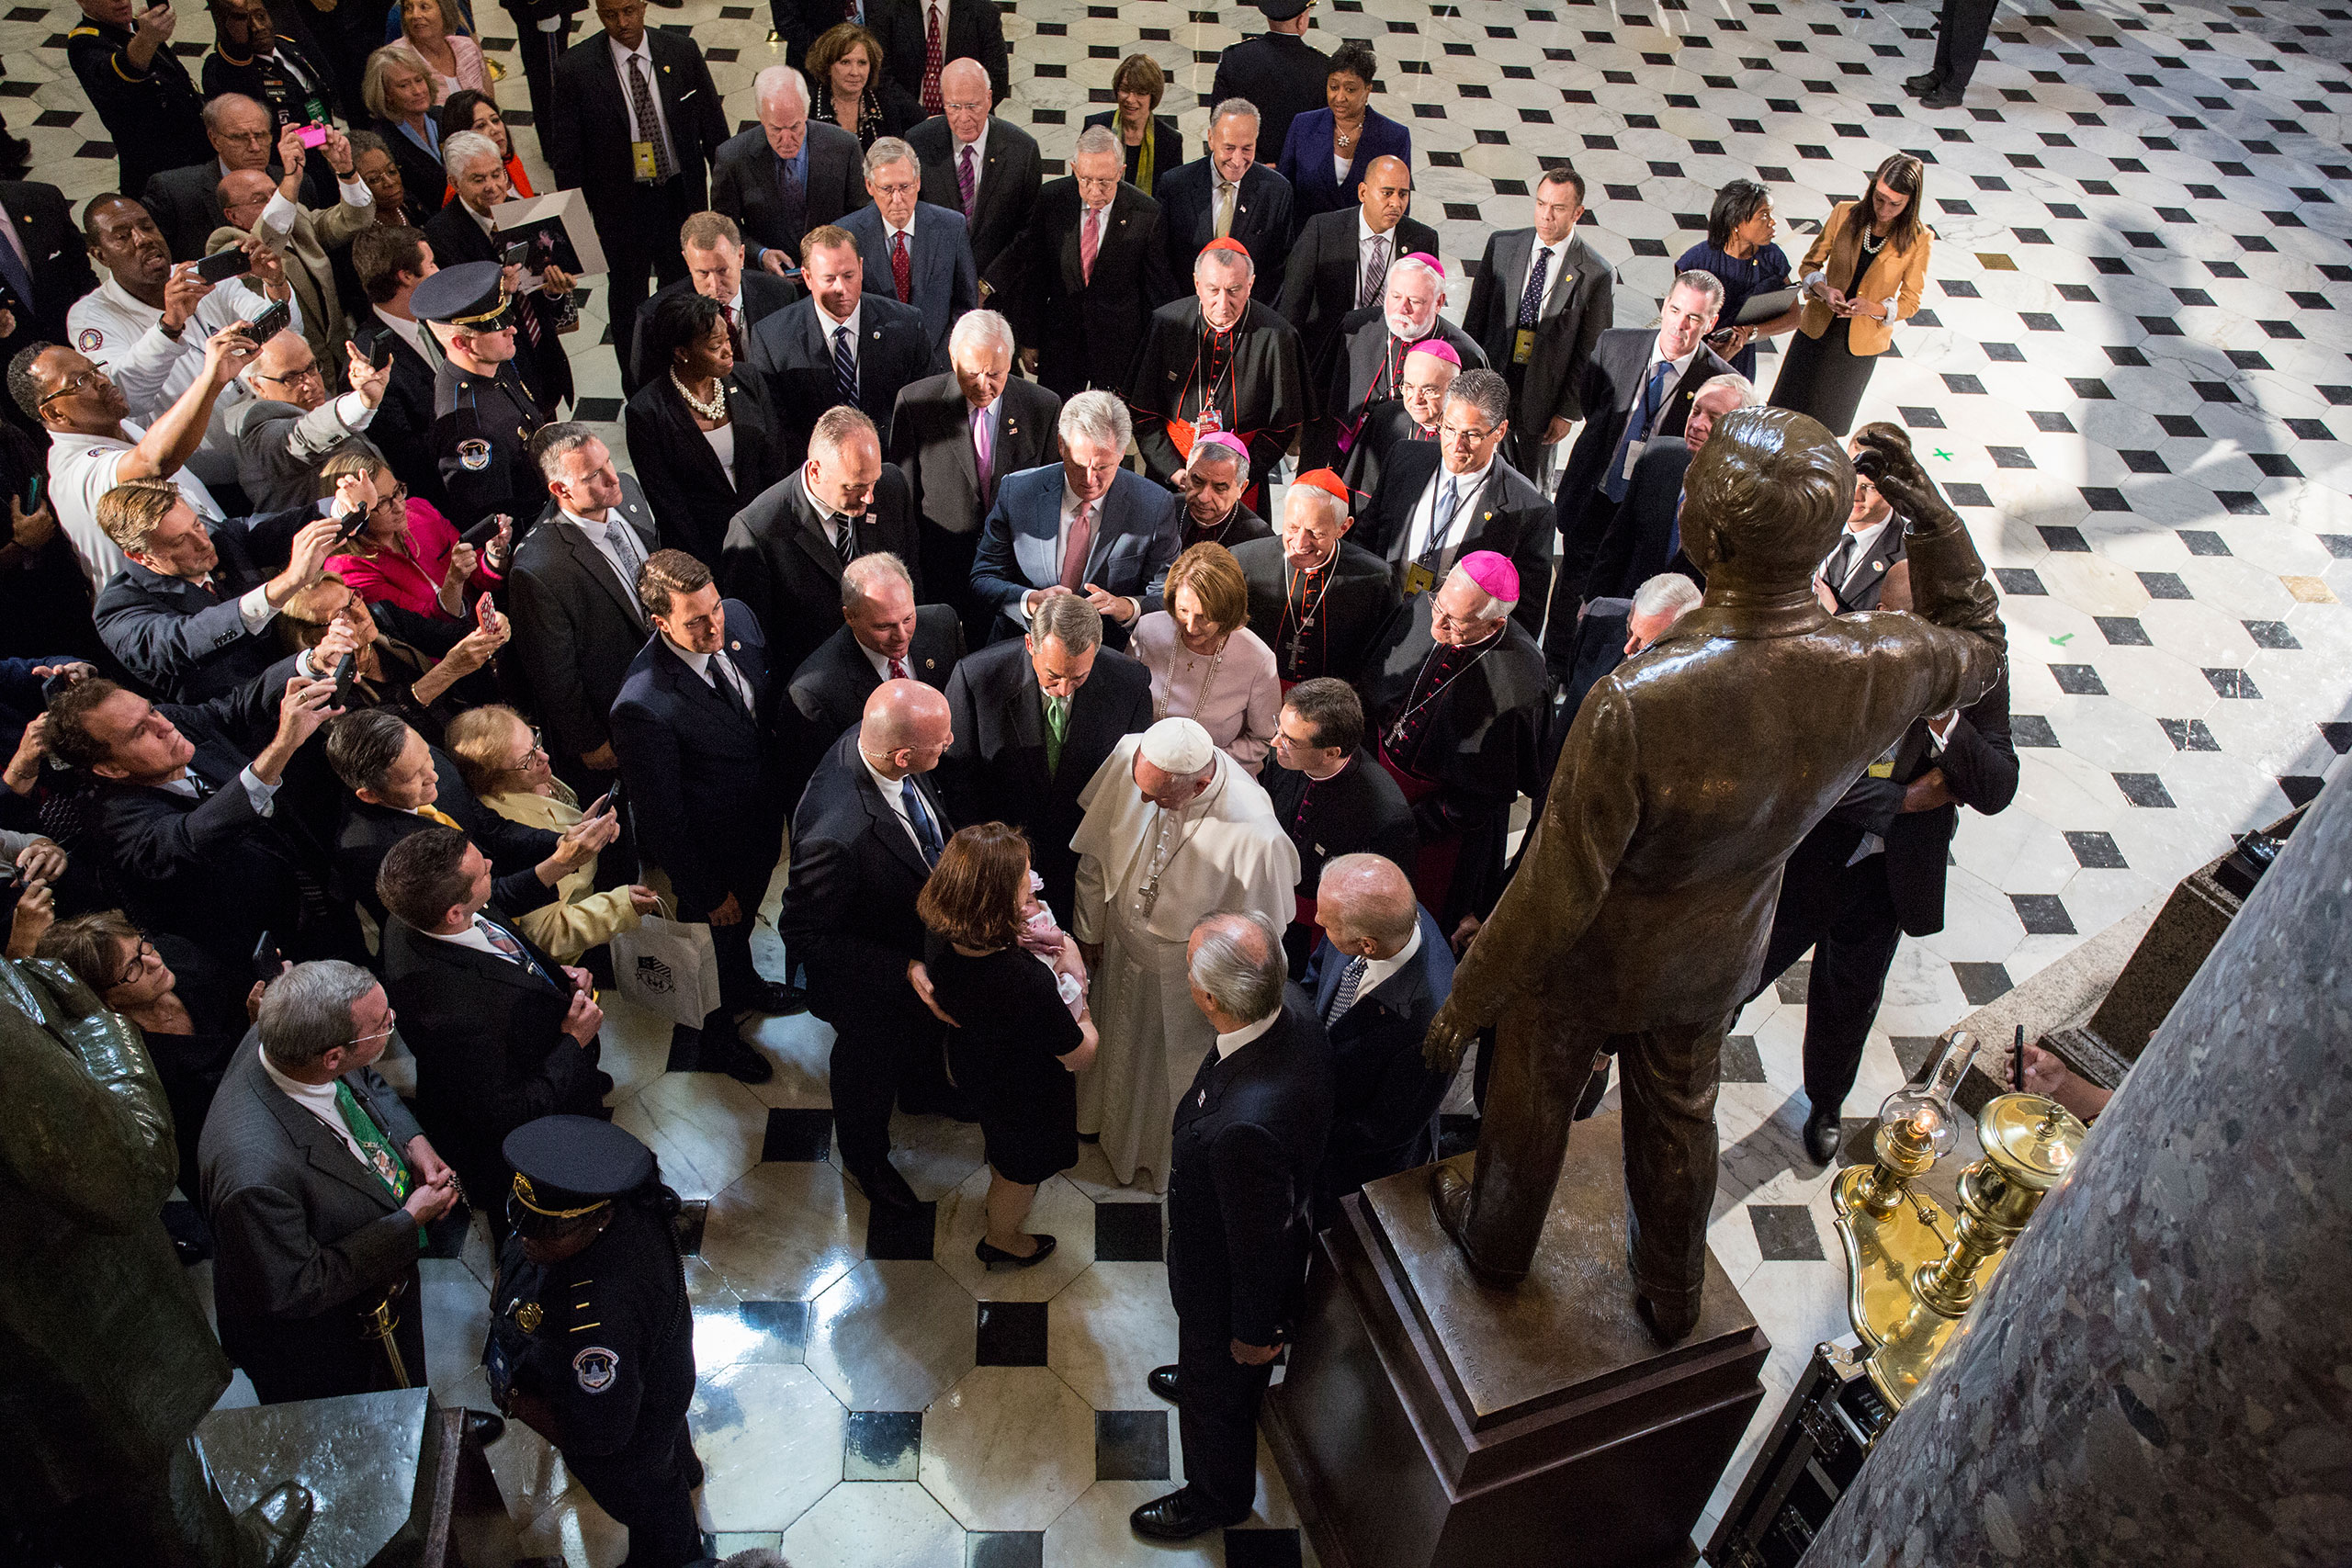 Pope Francis blesses an unidentified child in Statuary Hall at the U.S. Capitol in Washington, D.C. Sept, 24, 2015.From  Photographing the Pope From a Different Vantage Point